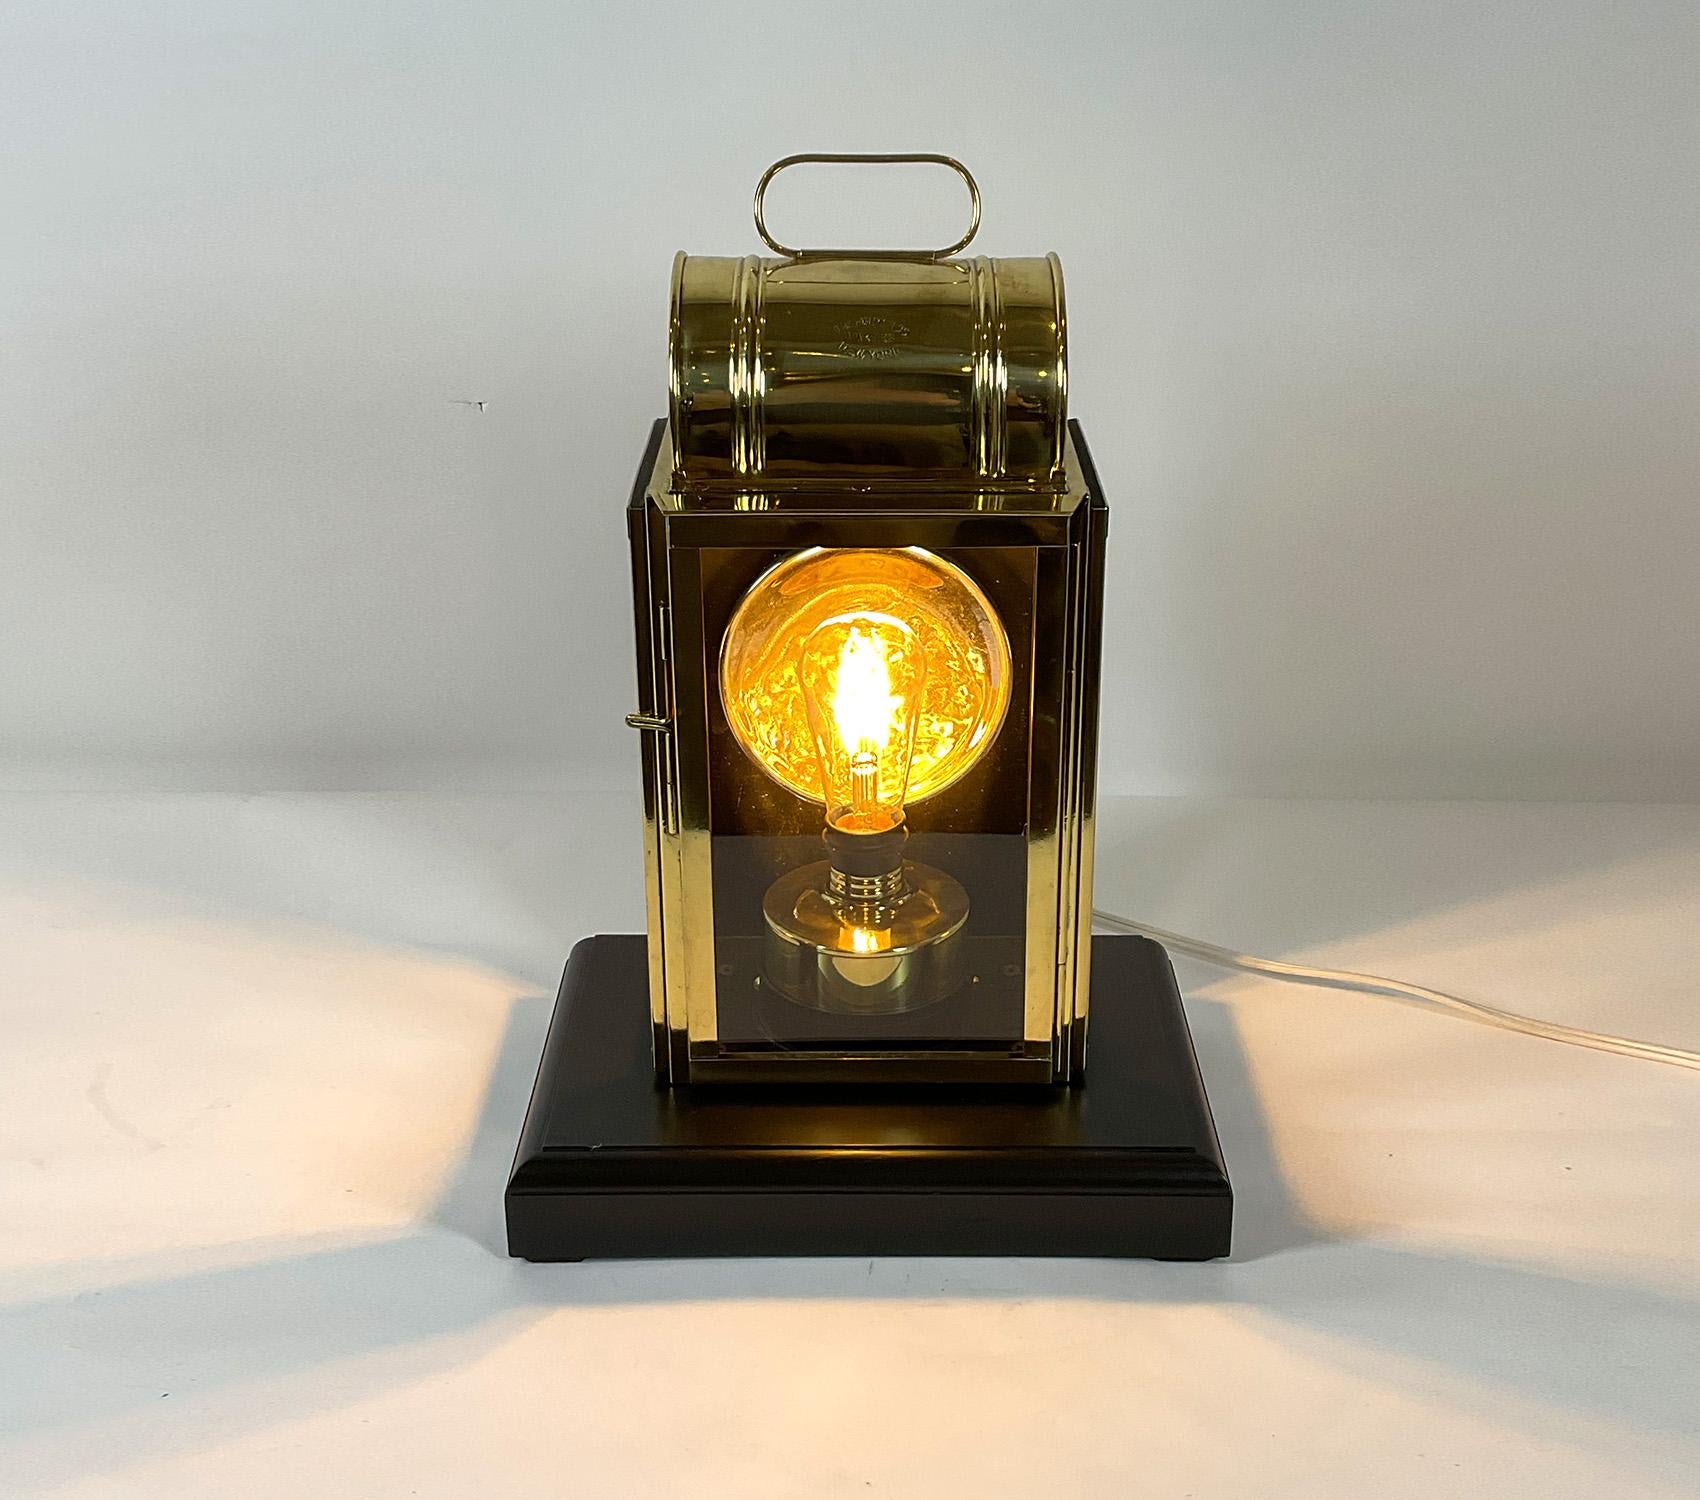 Yacht cabin lantern with impressed maker’s name of the Porter Company, New York. Mounted to a wood base. This has been meticulously polished and lacquered to a high level. Original reflector in case. The burner tank has been fitted with an electric